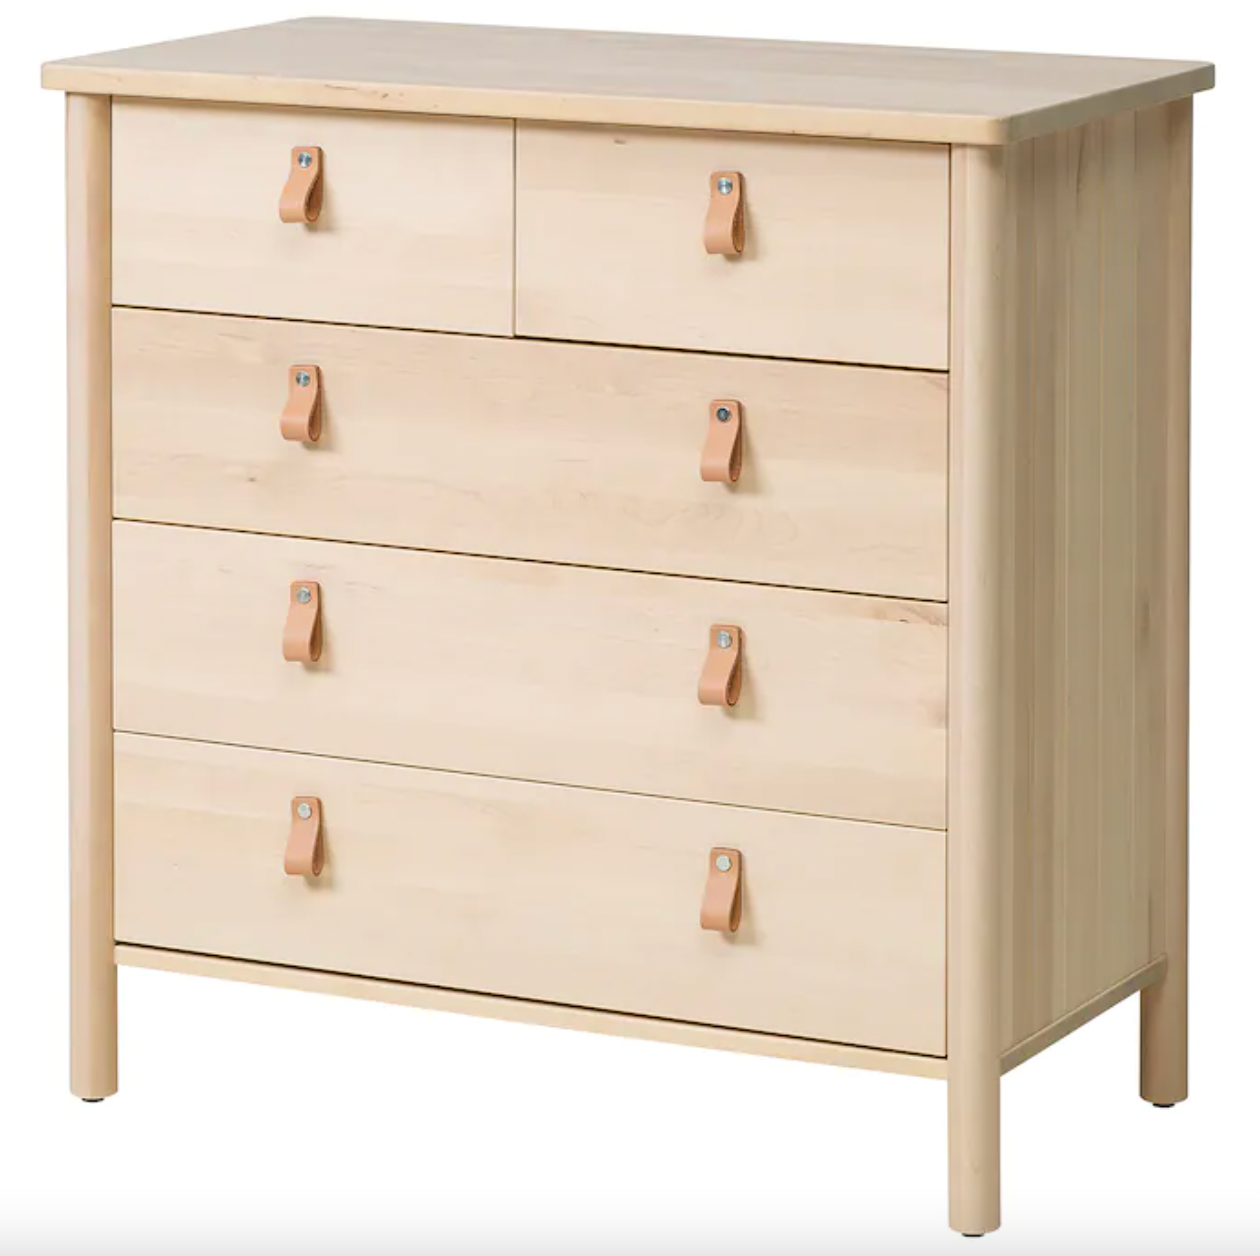 wood dresser with leather drawer pulls